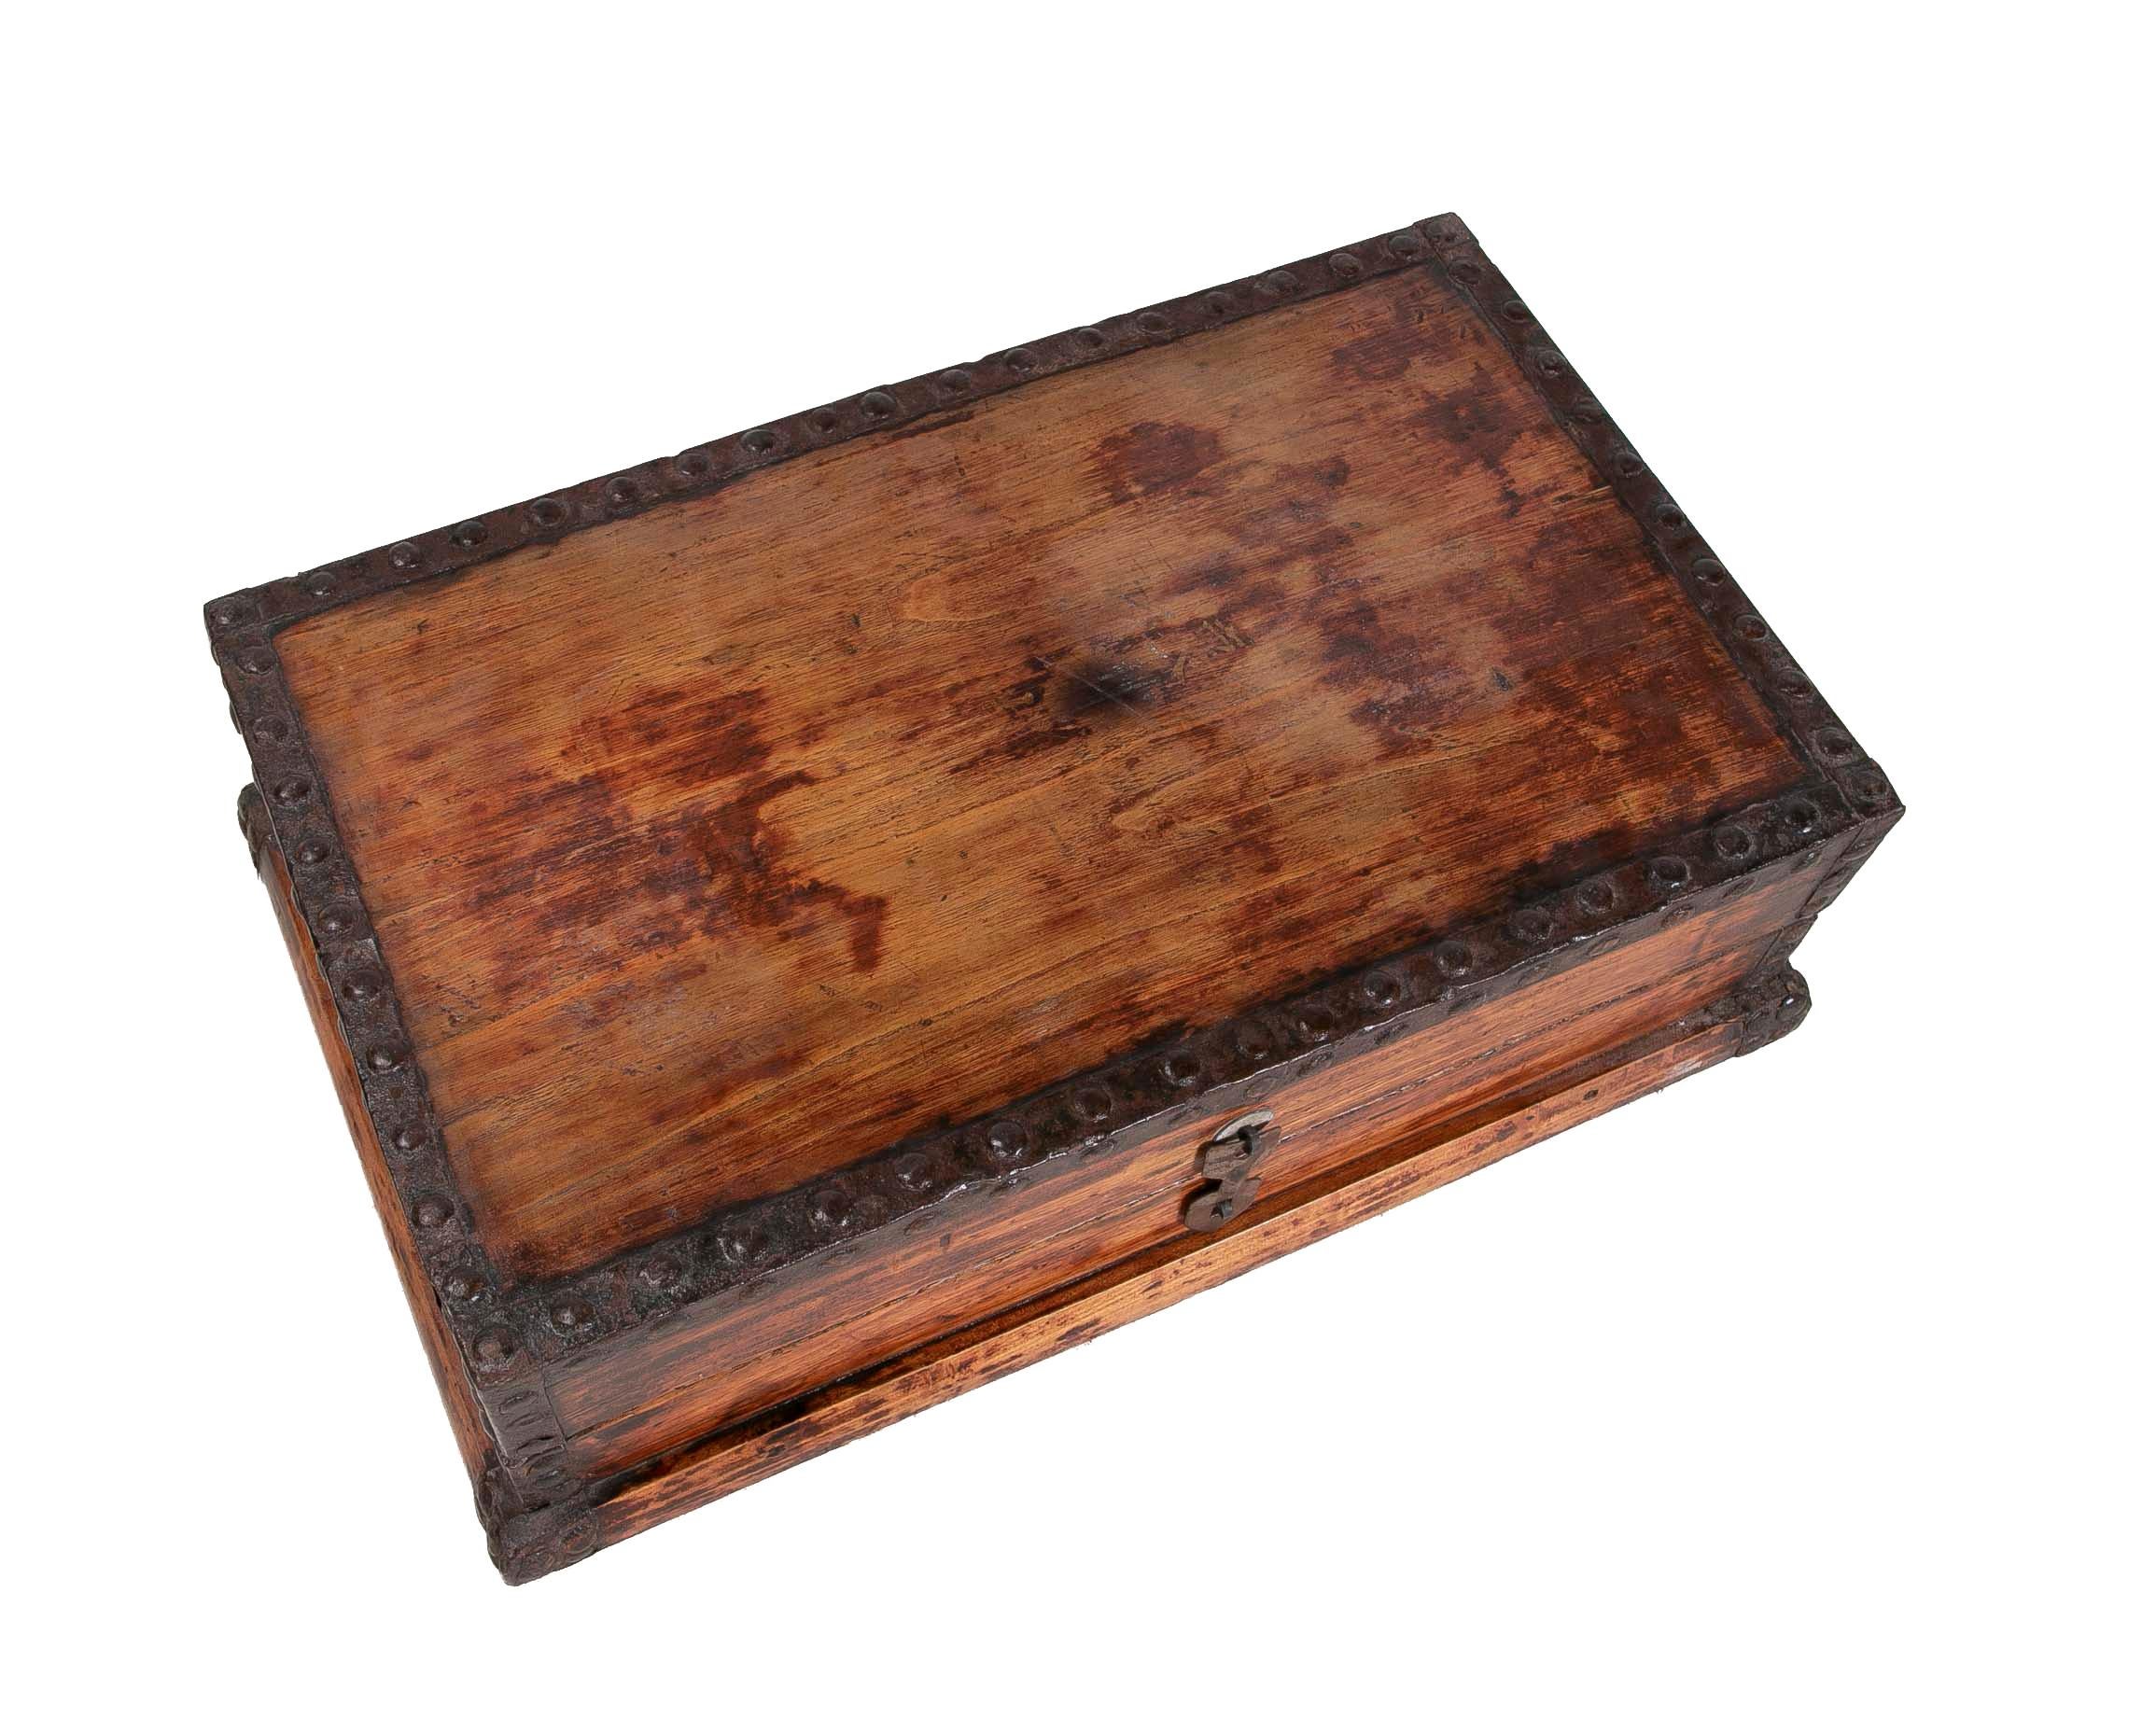 1930s wooden box with iron corners.